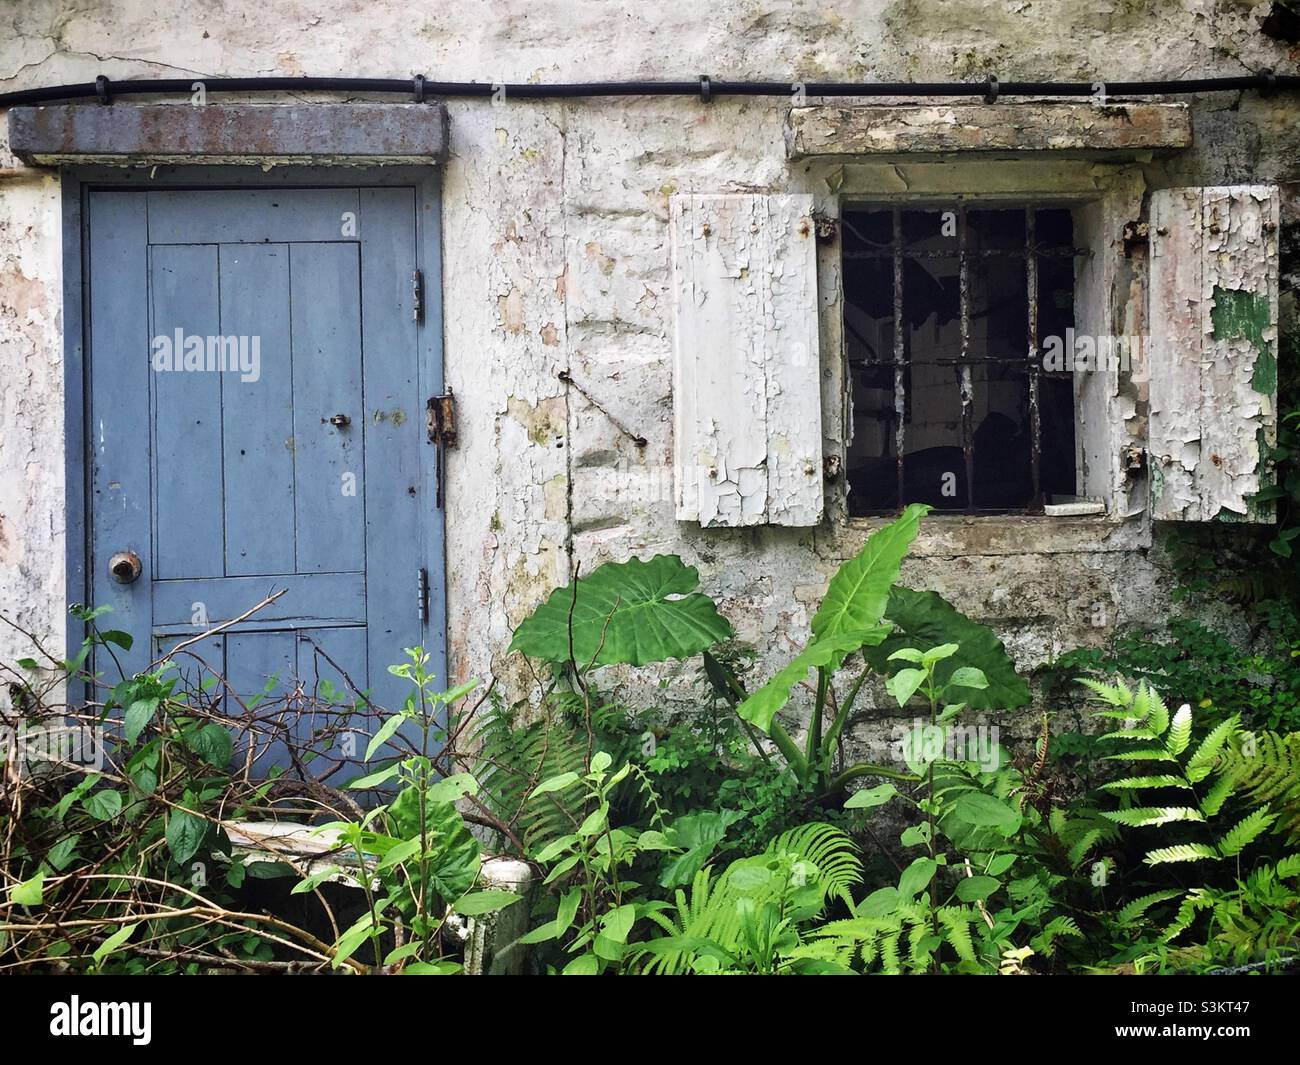 An abandoned house, formerly the kitchen of the old Tea Garden Restaurant, Ngong Ping, Lantau Island, Hong Kong Stock Photo